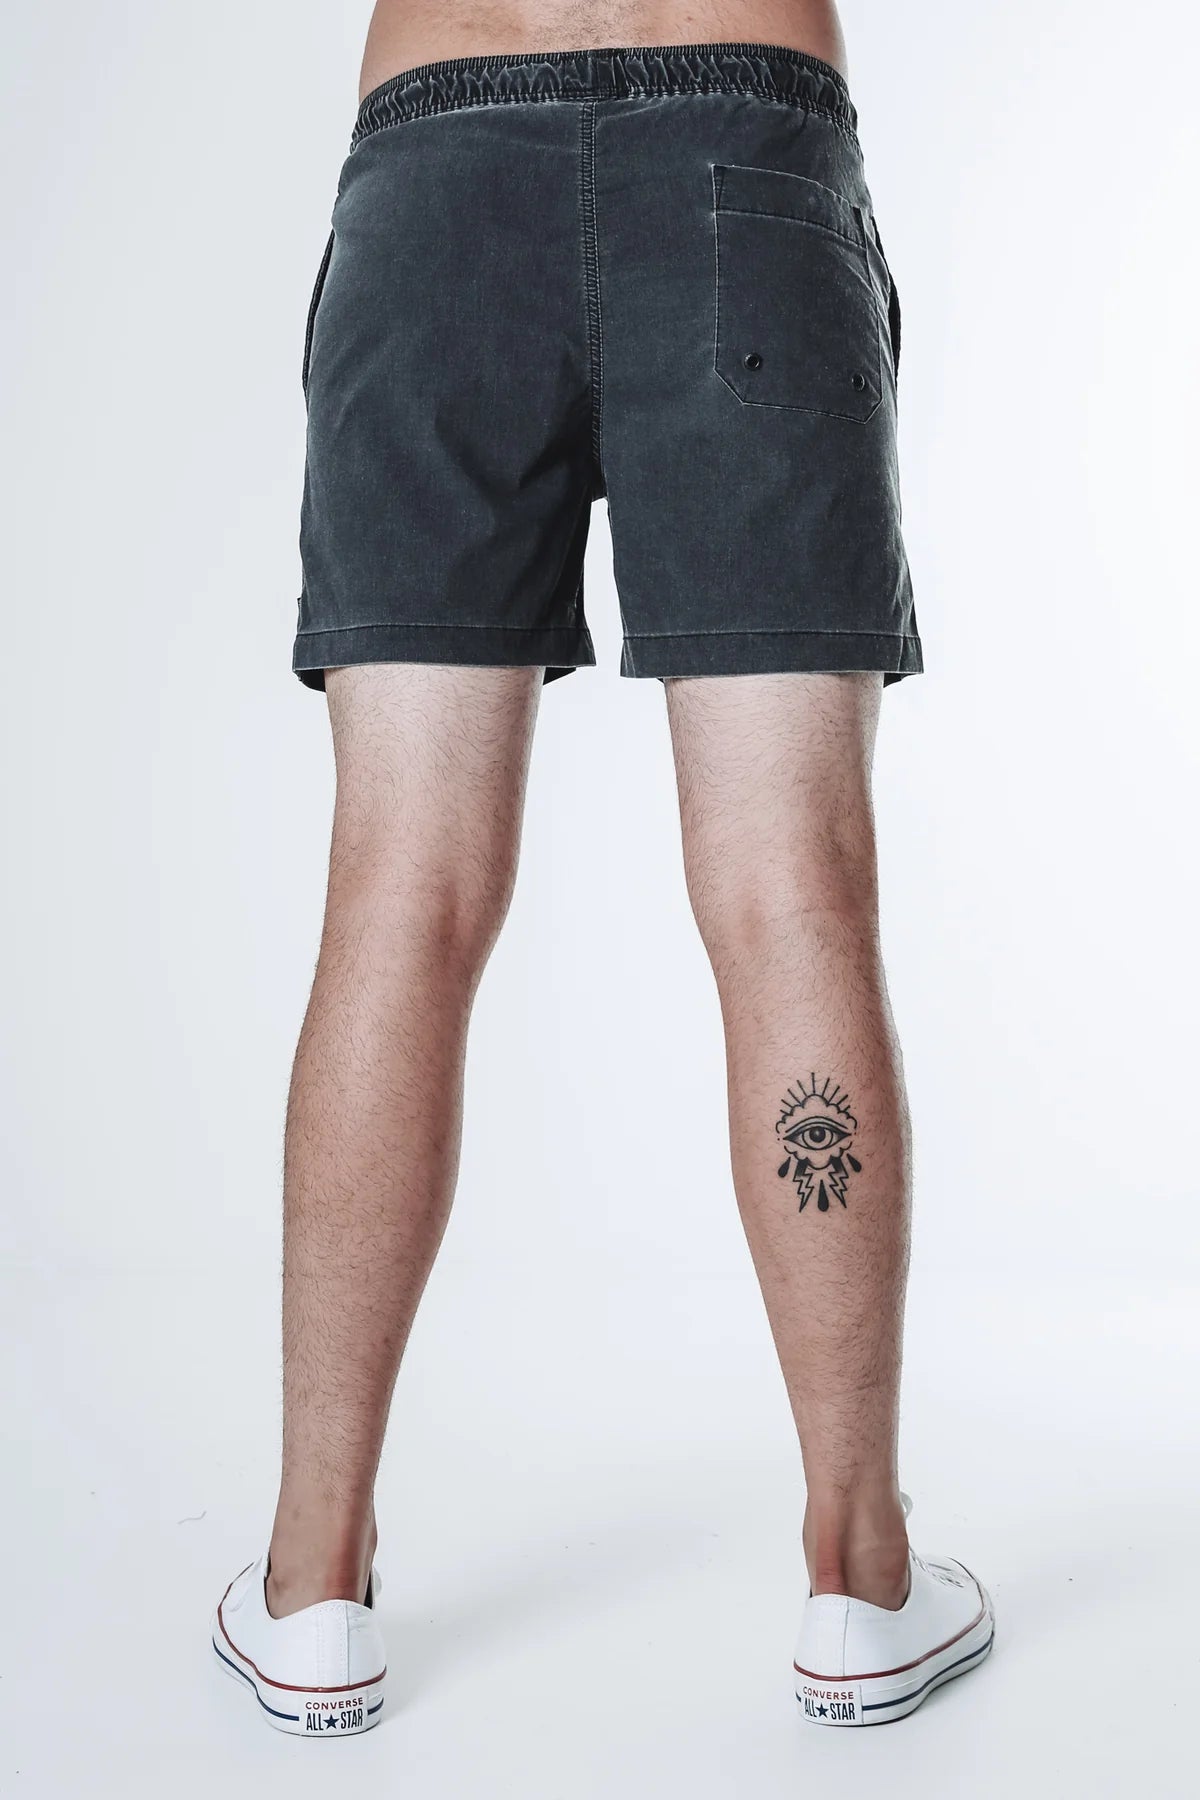 Silent theory dos beach short - washed black